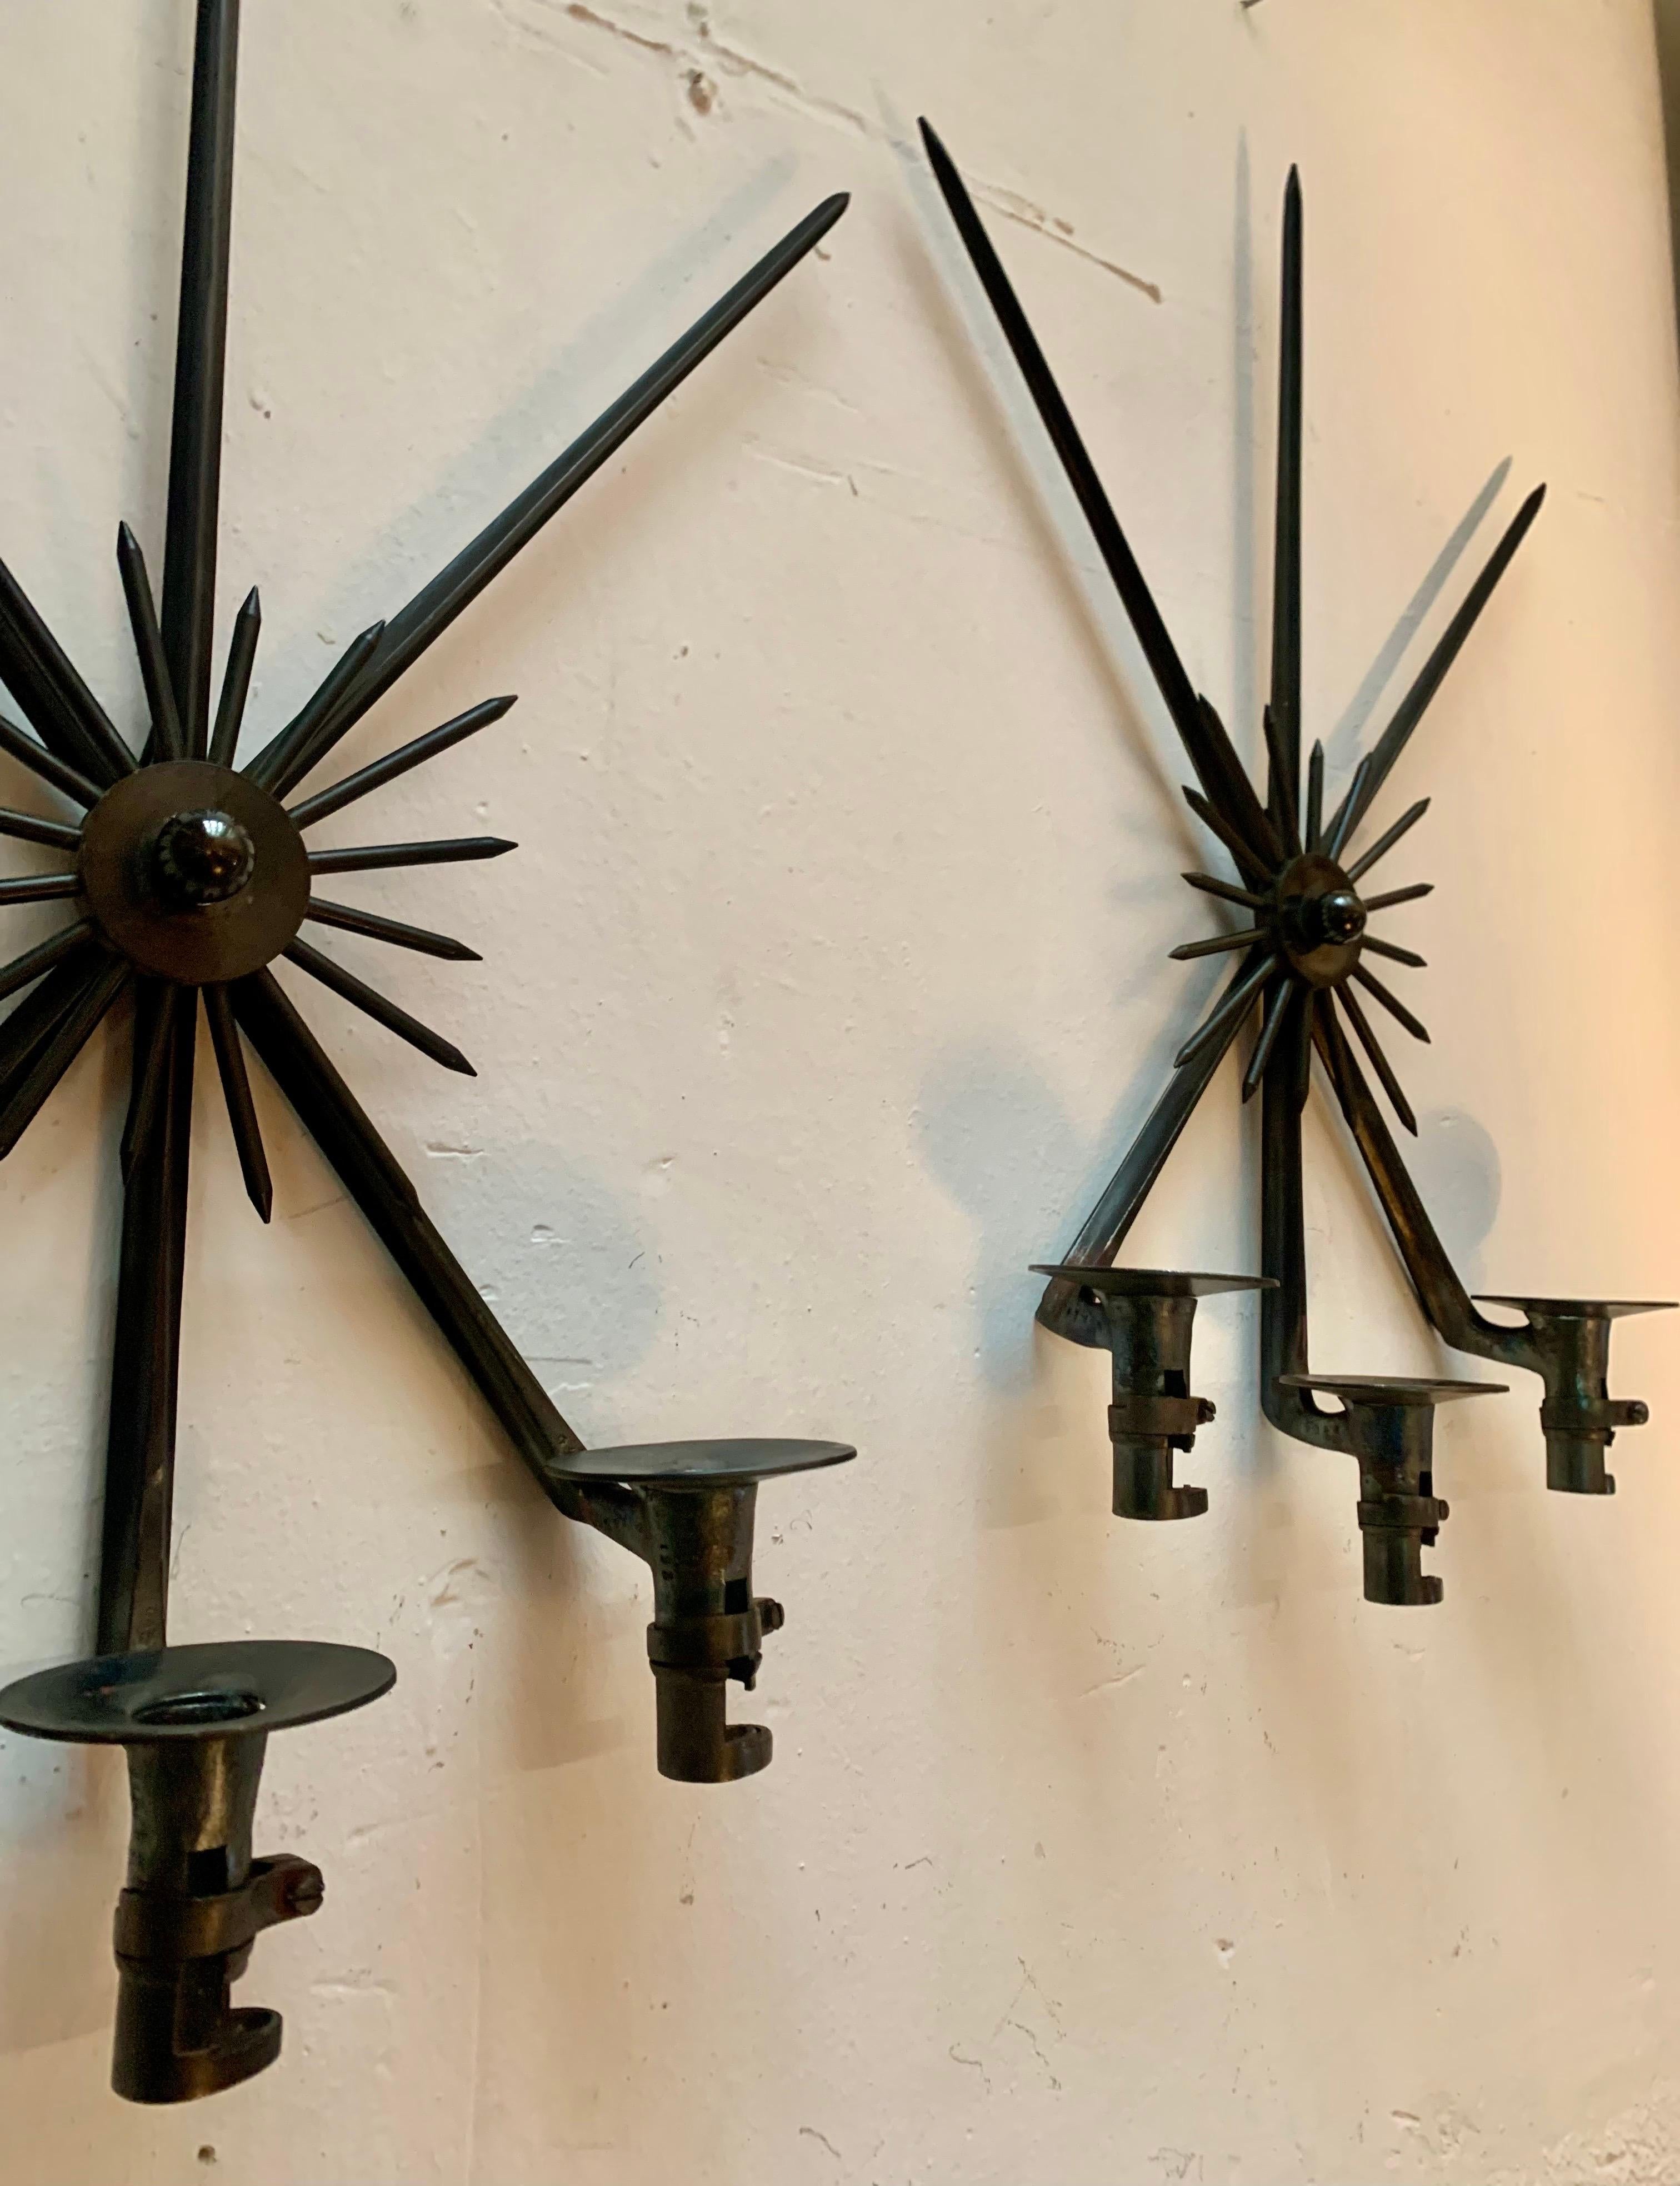 Pair of Apppliques Candle Sconces Made of Antique Bayonets For Sale 6